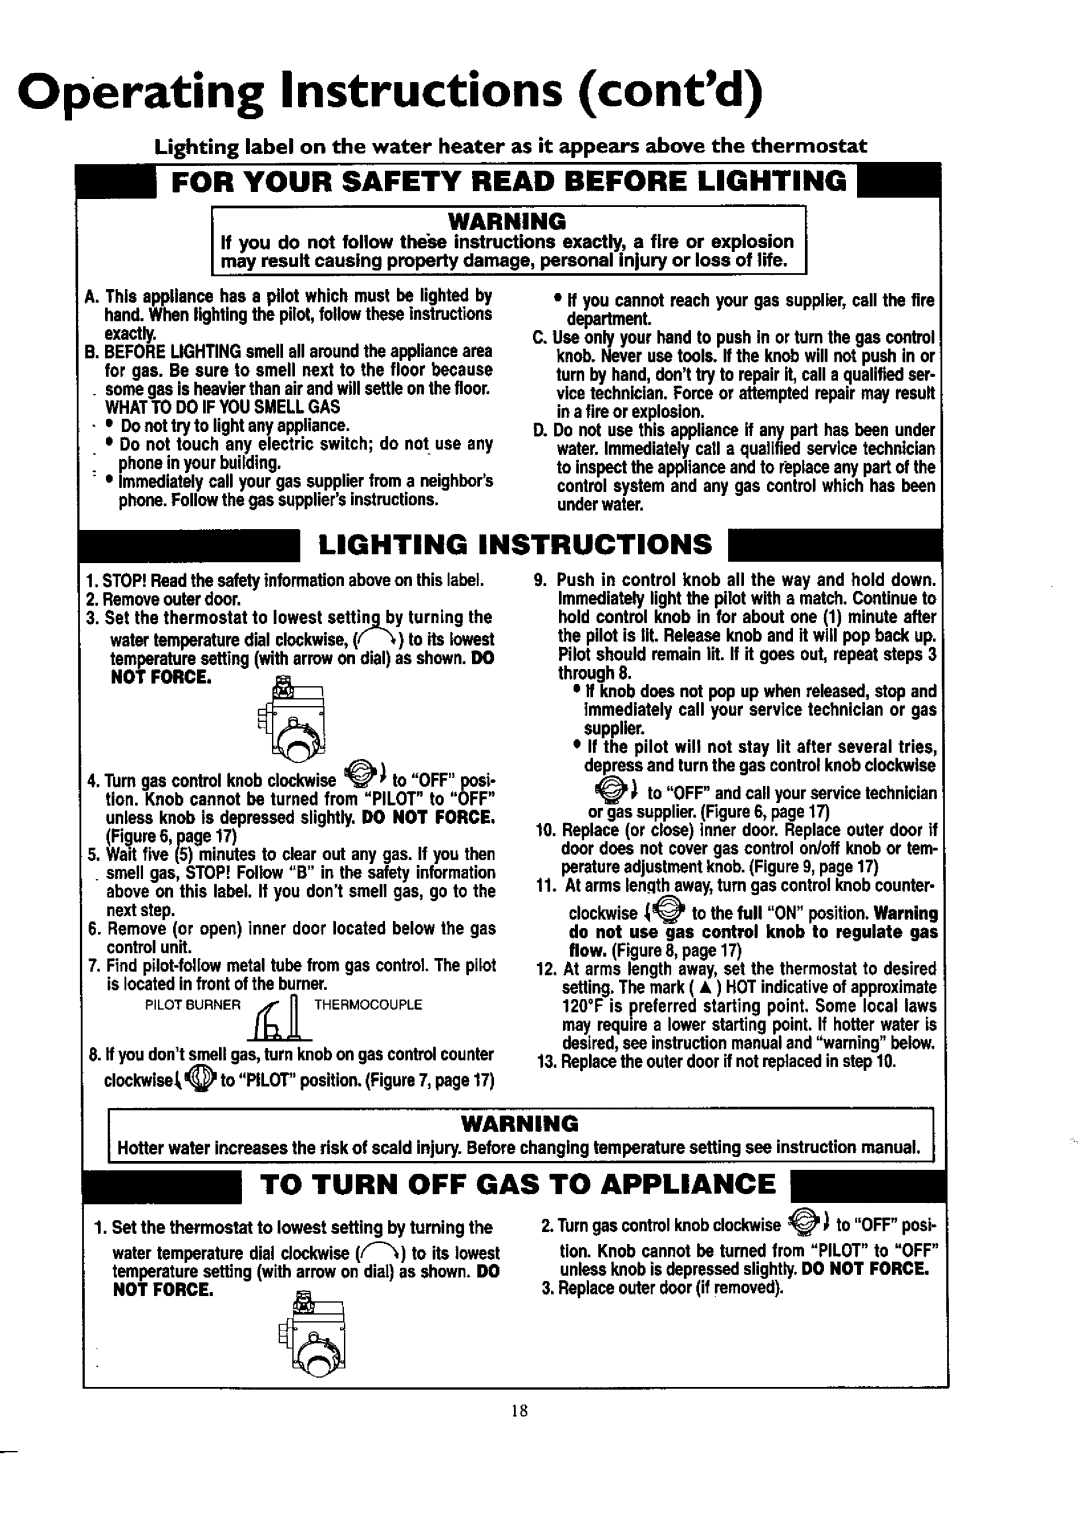 Kenmore 153.33439, 153.33459 Operating Instructions contd, For Your Safety Read Before Lighting, Lighting Instructions 